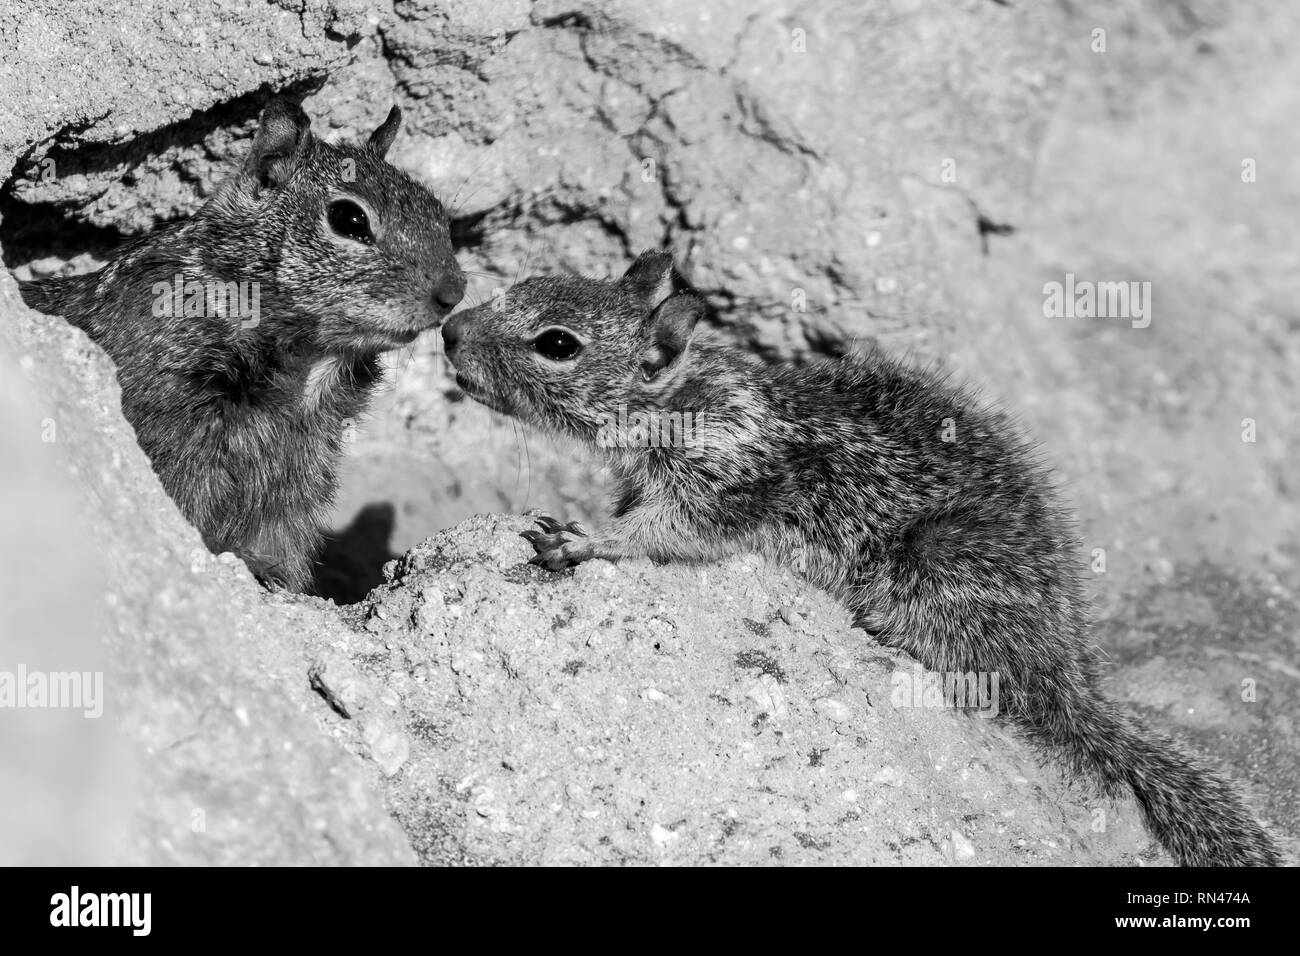 An adult California ground squirrel (Otospermophilus beecheyi) and its young at their burrow, Monterey Peninsula, California, USA Stock Photo